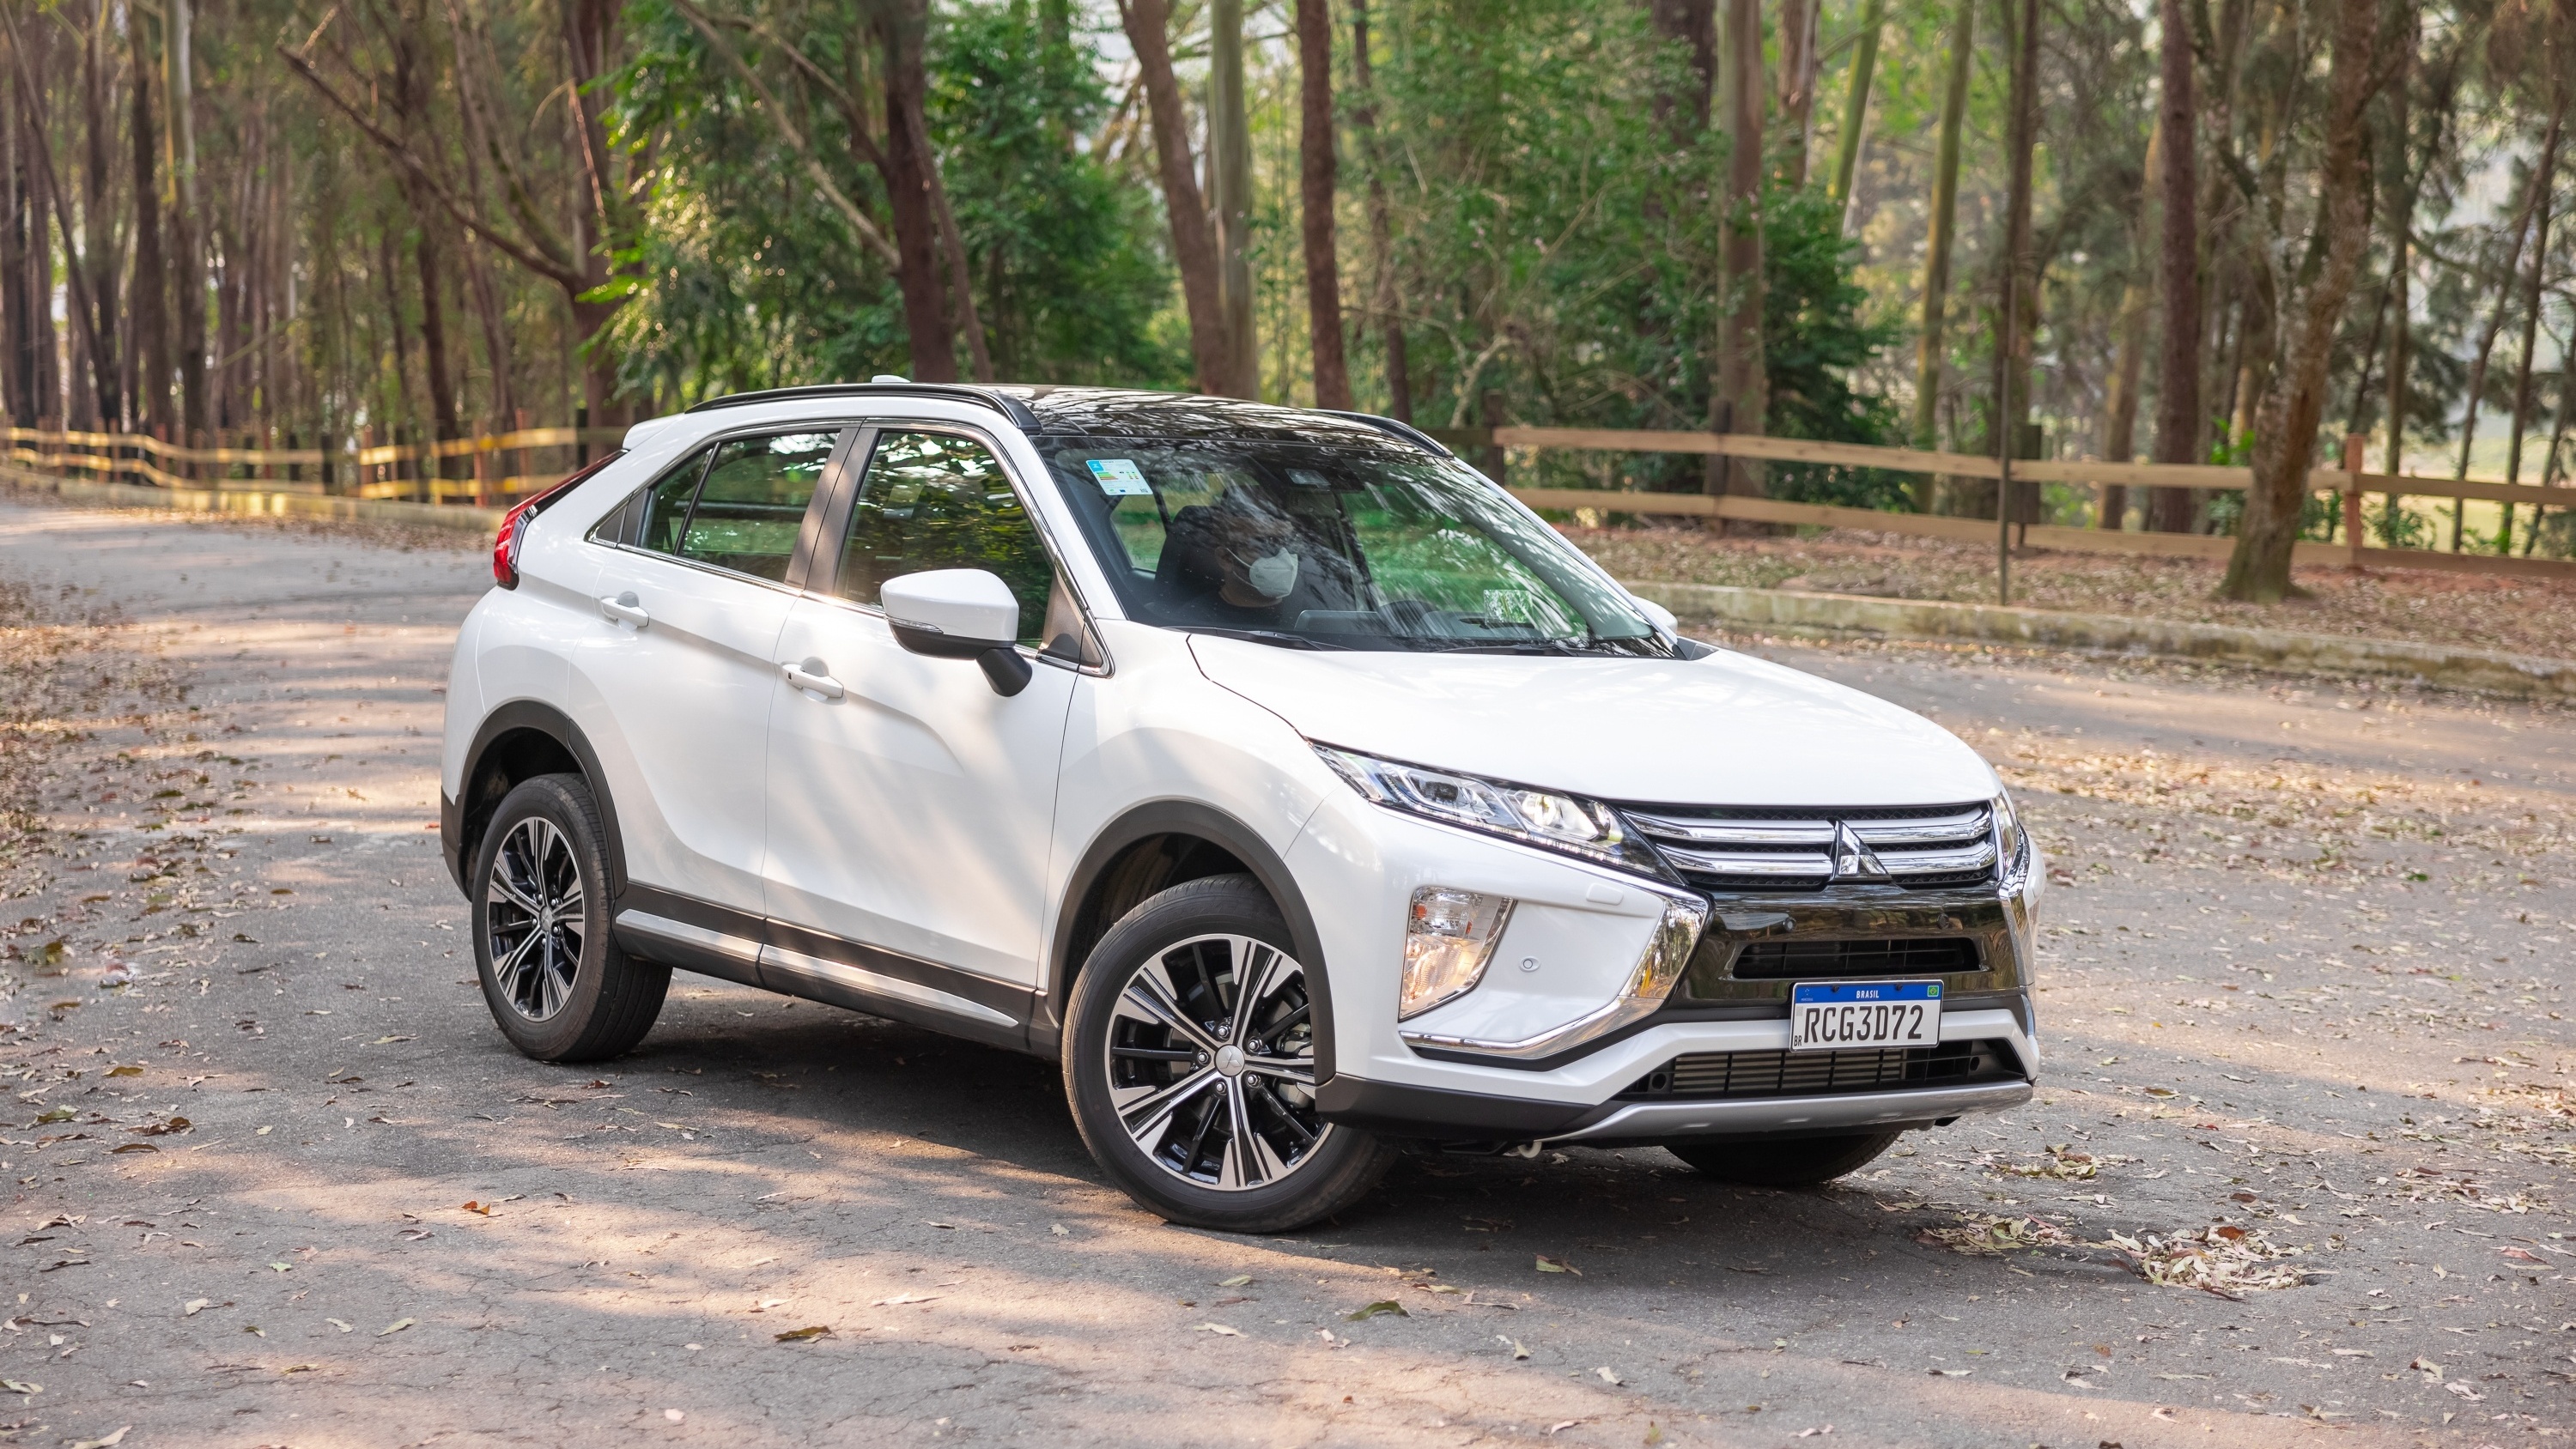 Mitsubishi Eclipse Cross The appearance of the SUV is still the cause